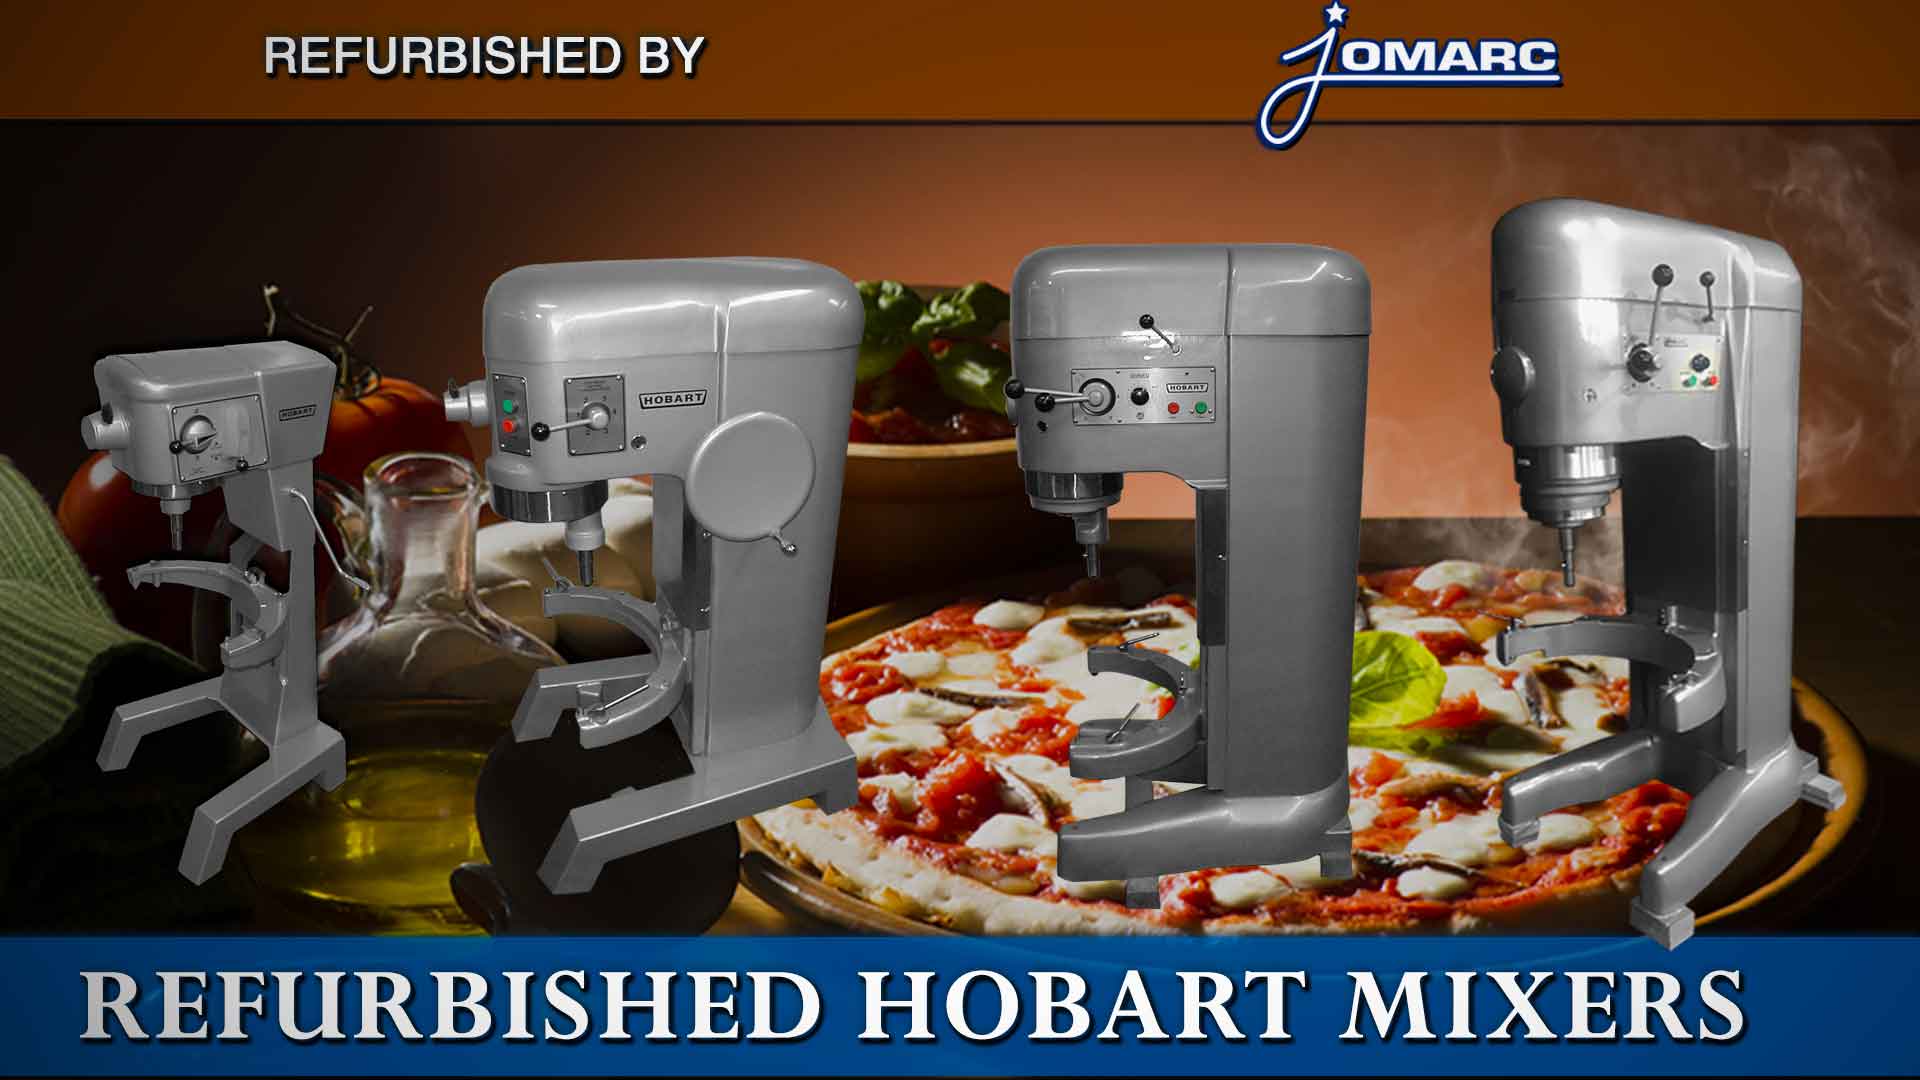 Hobart Mixer D300 30-quart Refurbished by Jomarc Emergency Commercial Food Service Equipment for Absecon, Northfield , Ocean City New Jersey 08201. We guarantee our work, warranty, freight shipping to all 50 states, Canada, Paris France